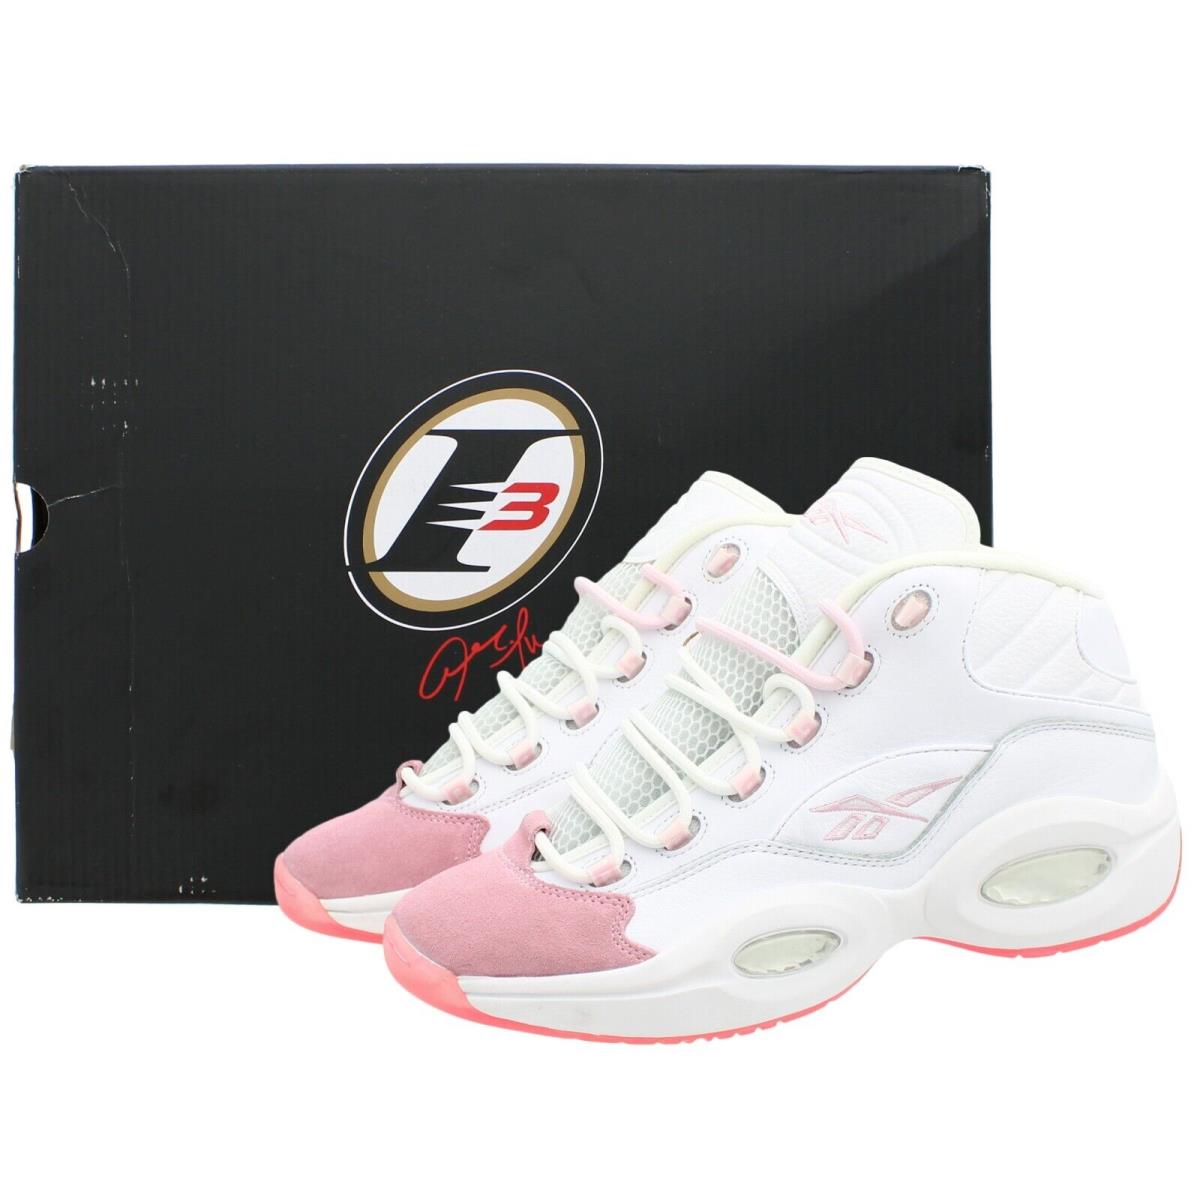 Reebok Question Mid-top Shoes G55120 Unisex Basketball Shoe Suede Accents